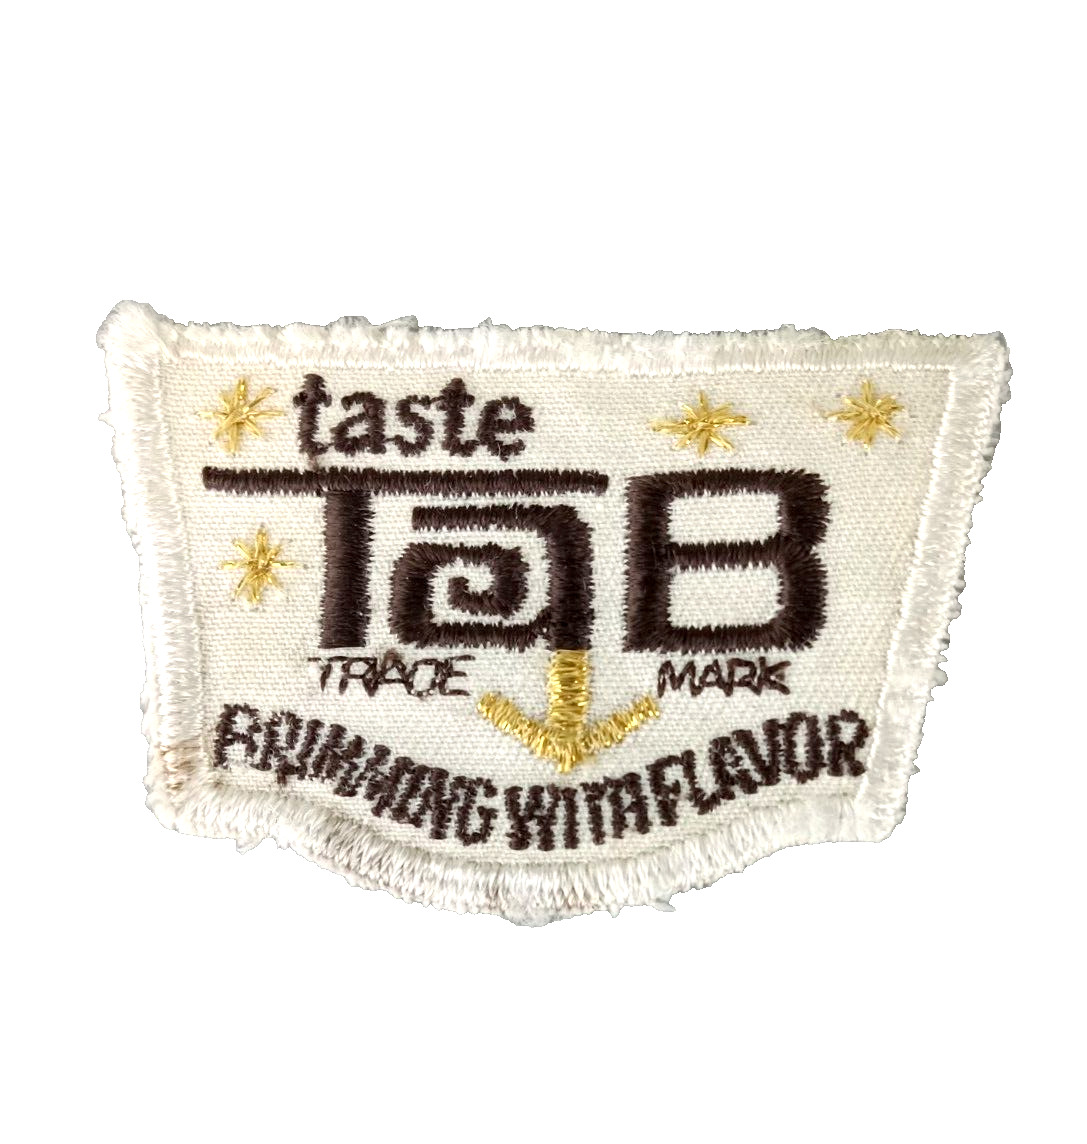 Vintage Soda Advertising Taste TAB Brimming with Flavor Embroidered Patch Cola